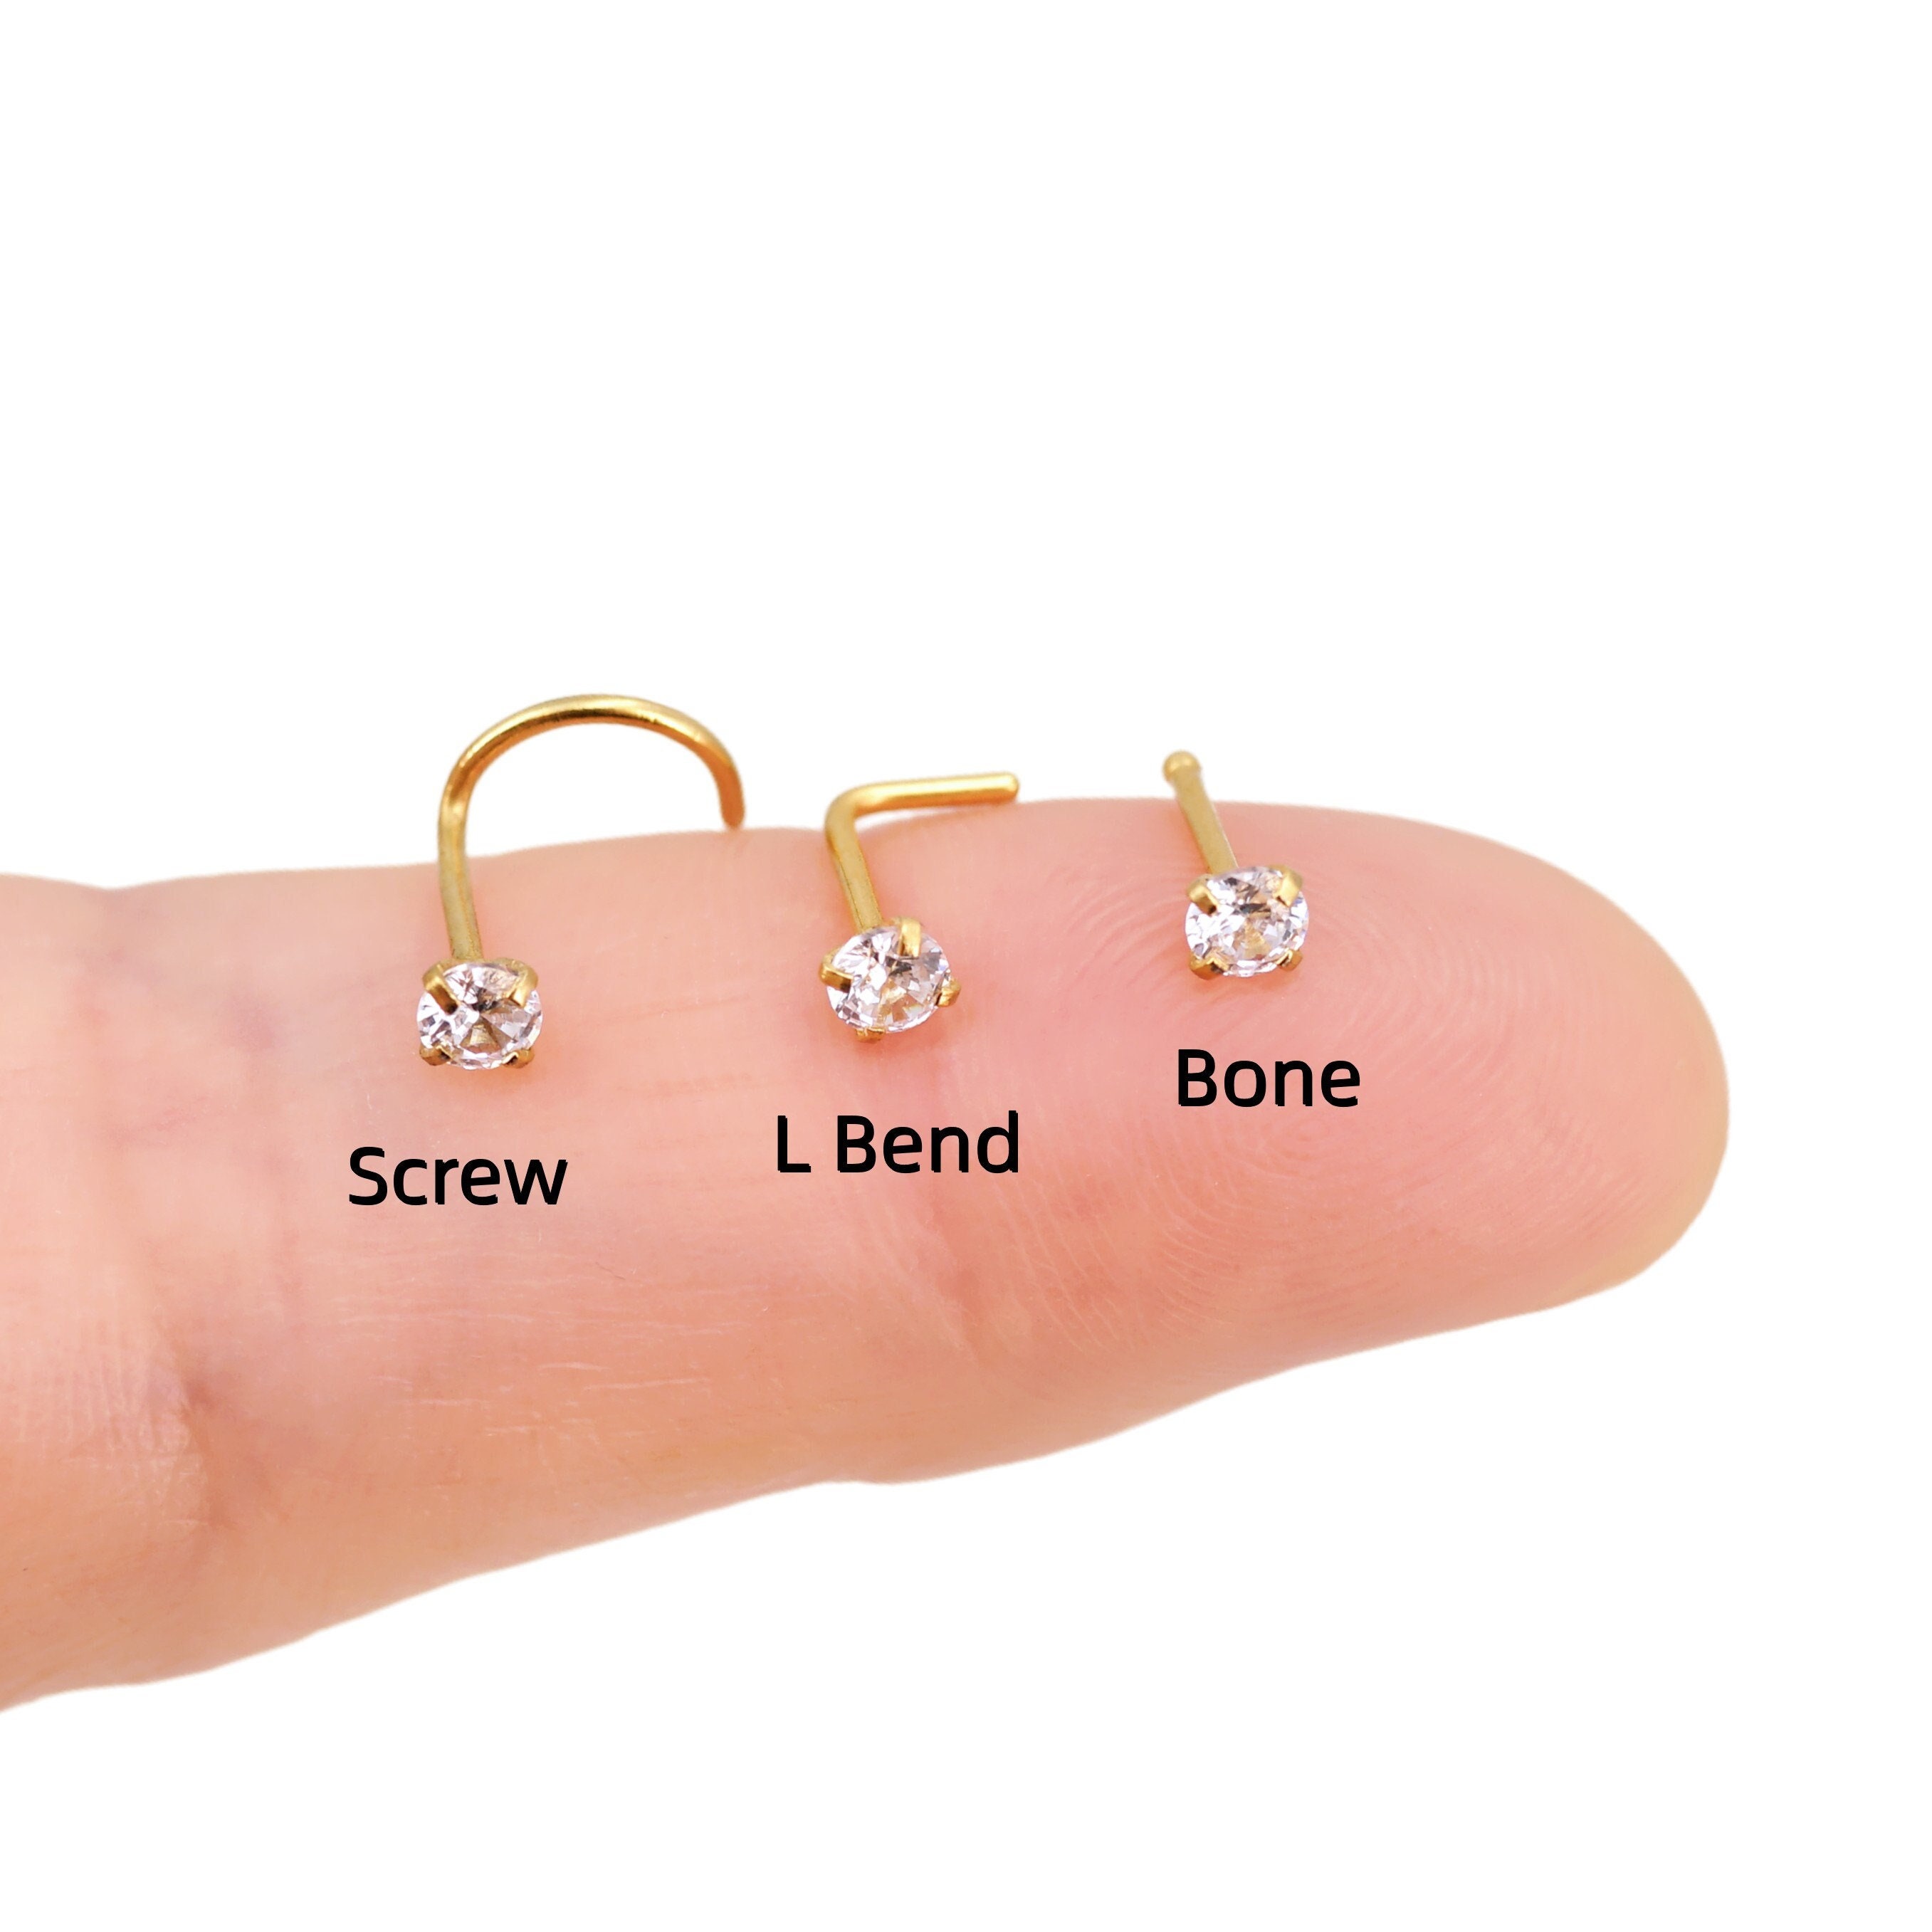 Nose Stud Surgical Steel Clear L-Shape Pin Straight Piercing 1.5mm 2mm  2.5mm 3mm